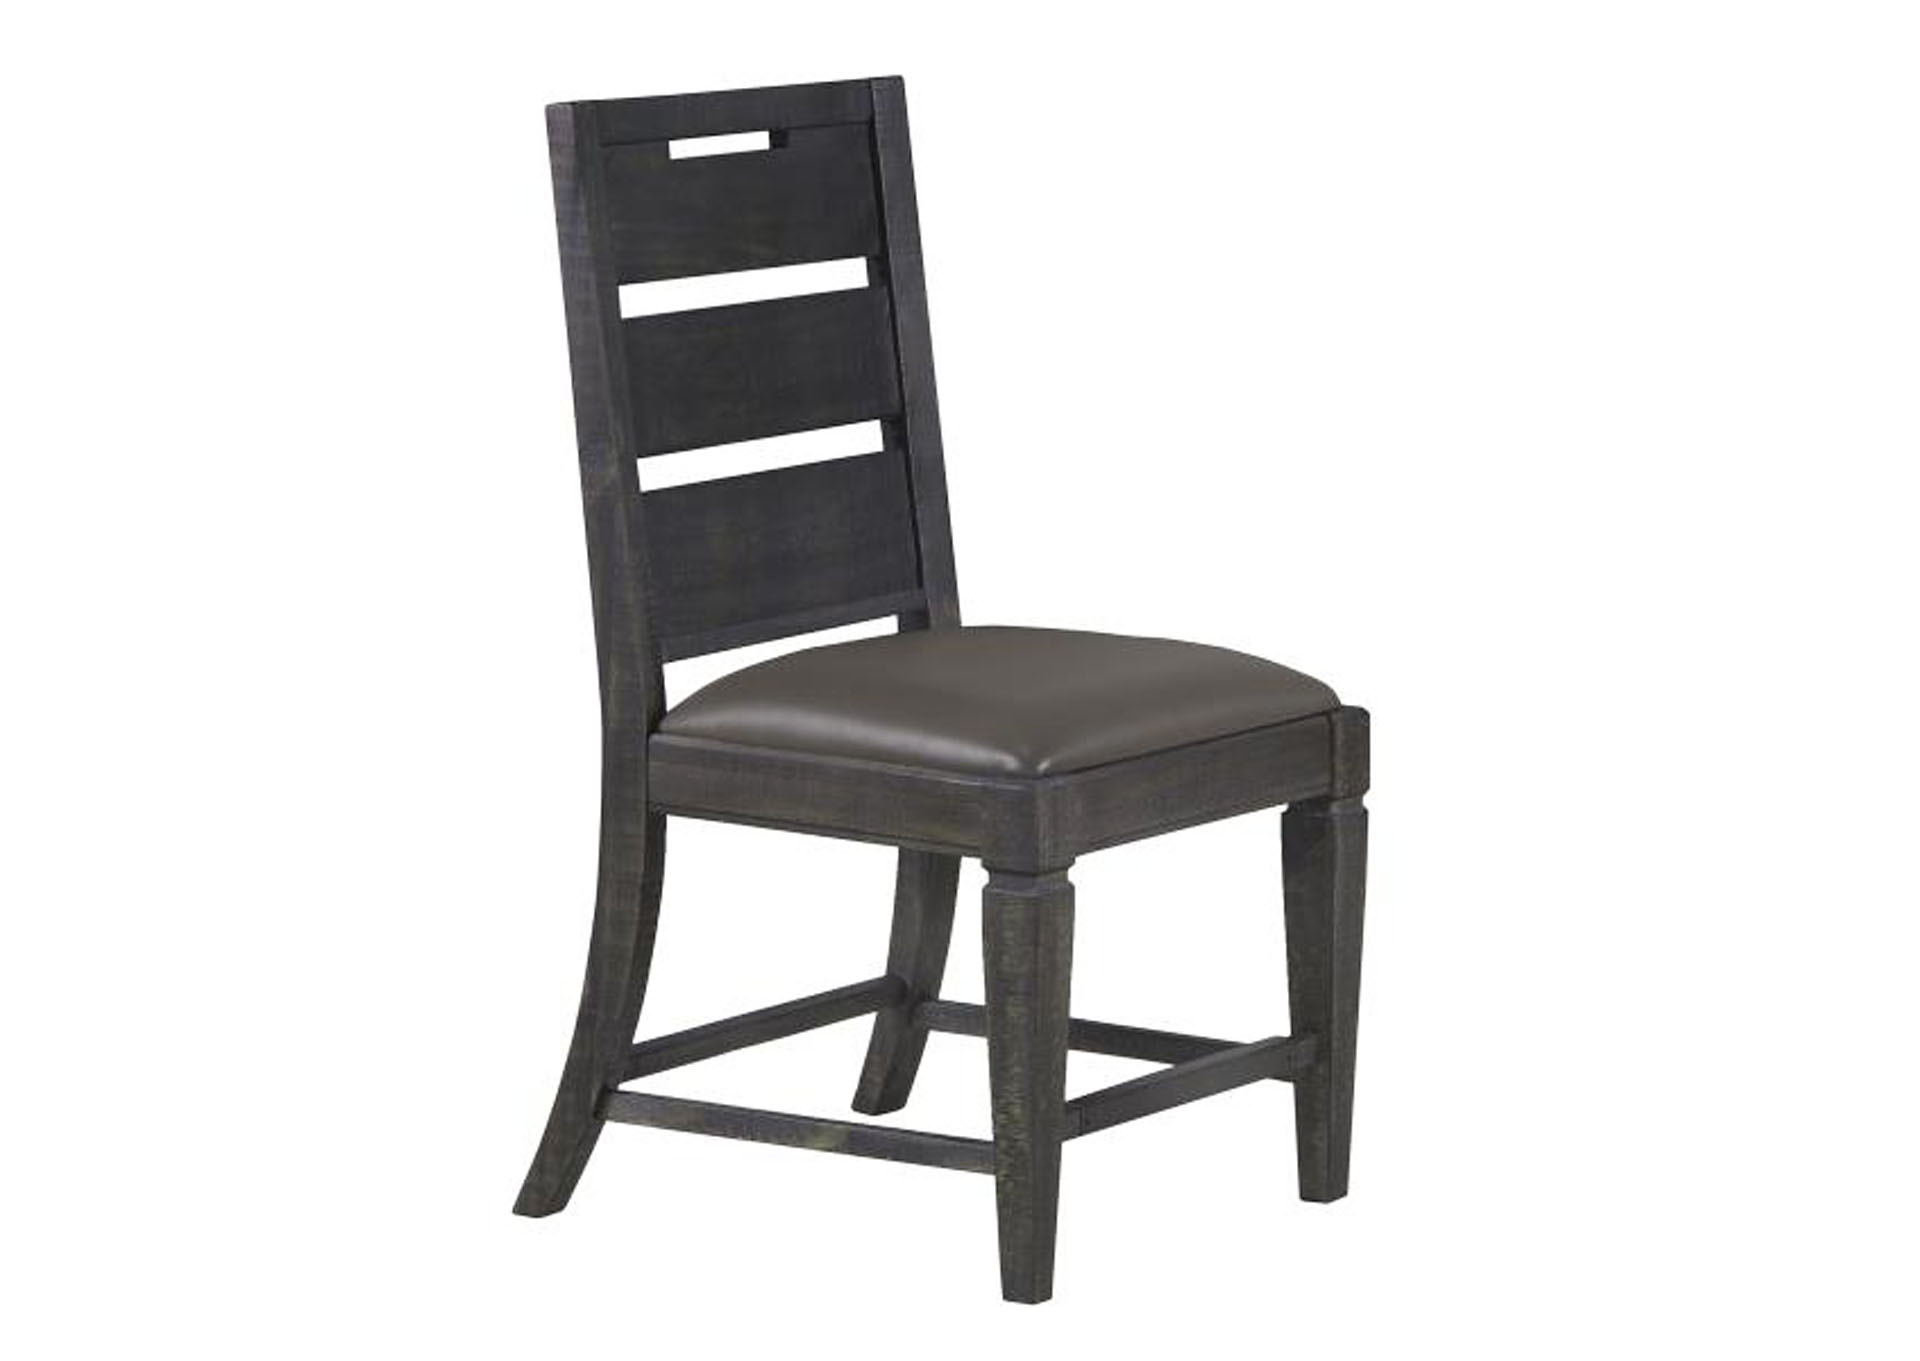 Abington Weathered Charcoal Dining Side Chair w/Upholstered Seat (2/ctn),Magnussen